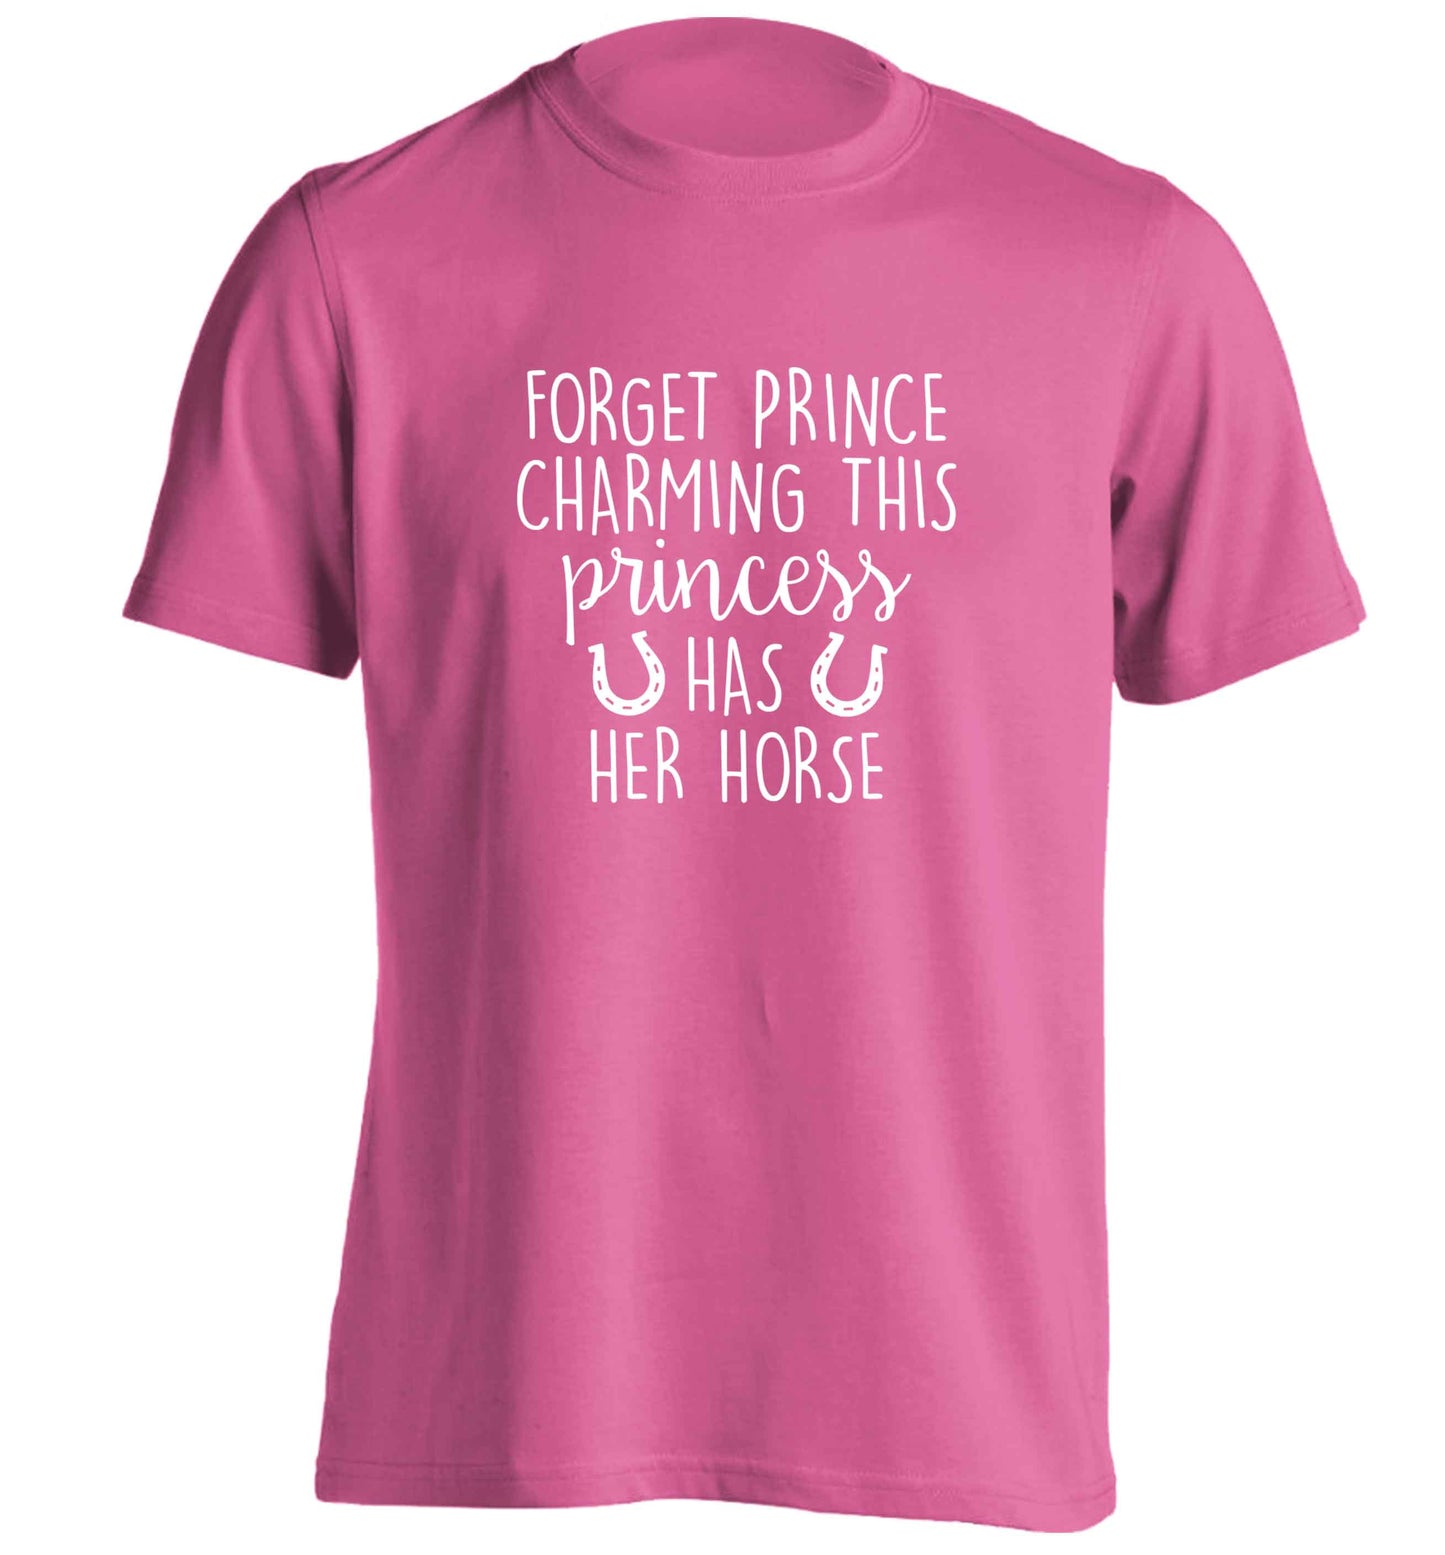 Forget prince charming this princess has her horse adults unisex pink Tshirt 2XL